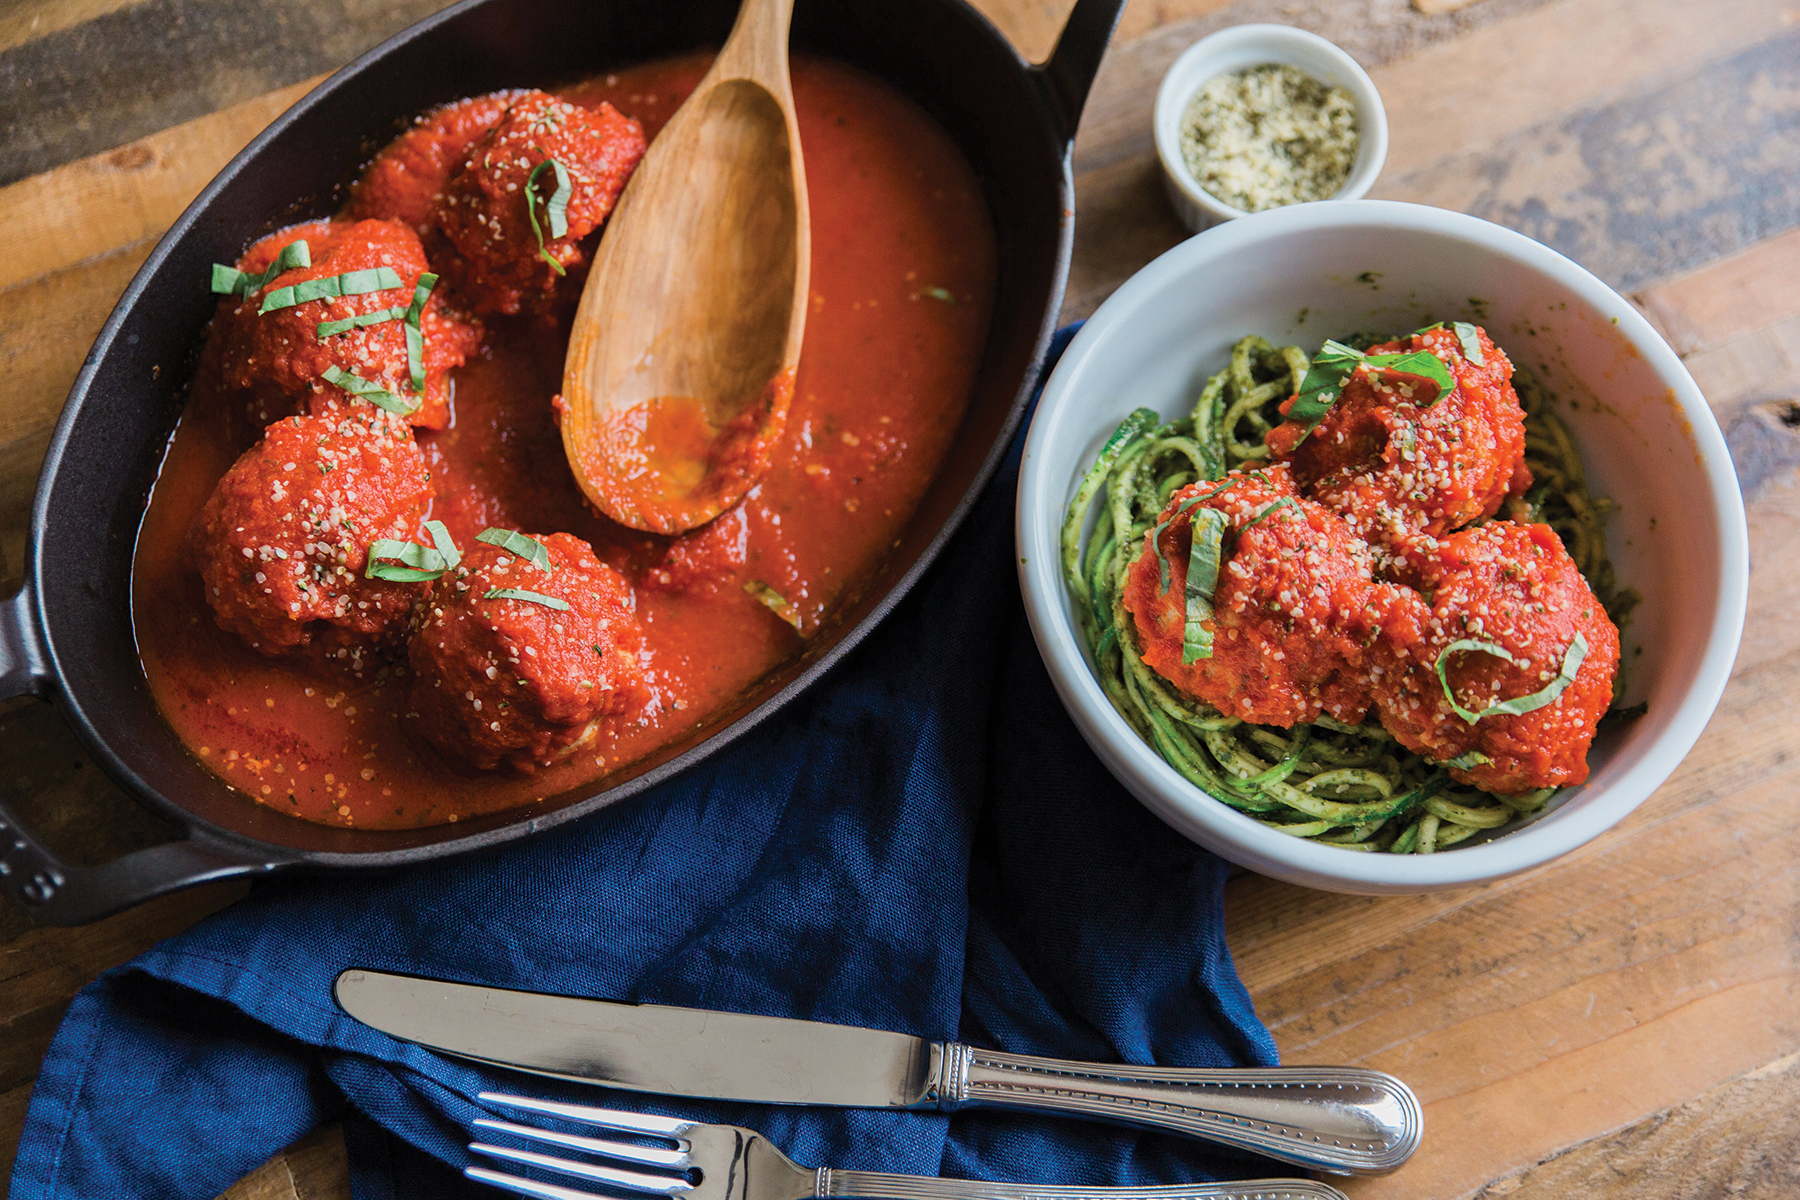 PHOTO: "Body Love" author Kelly LeVeque shares her recipe for Paleo meatballs with zucchini noodles.